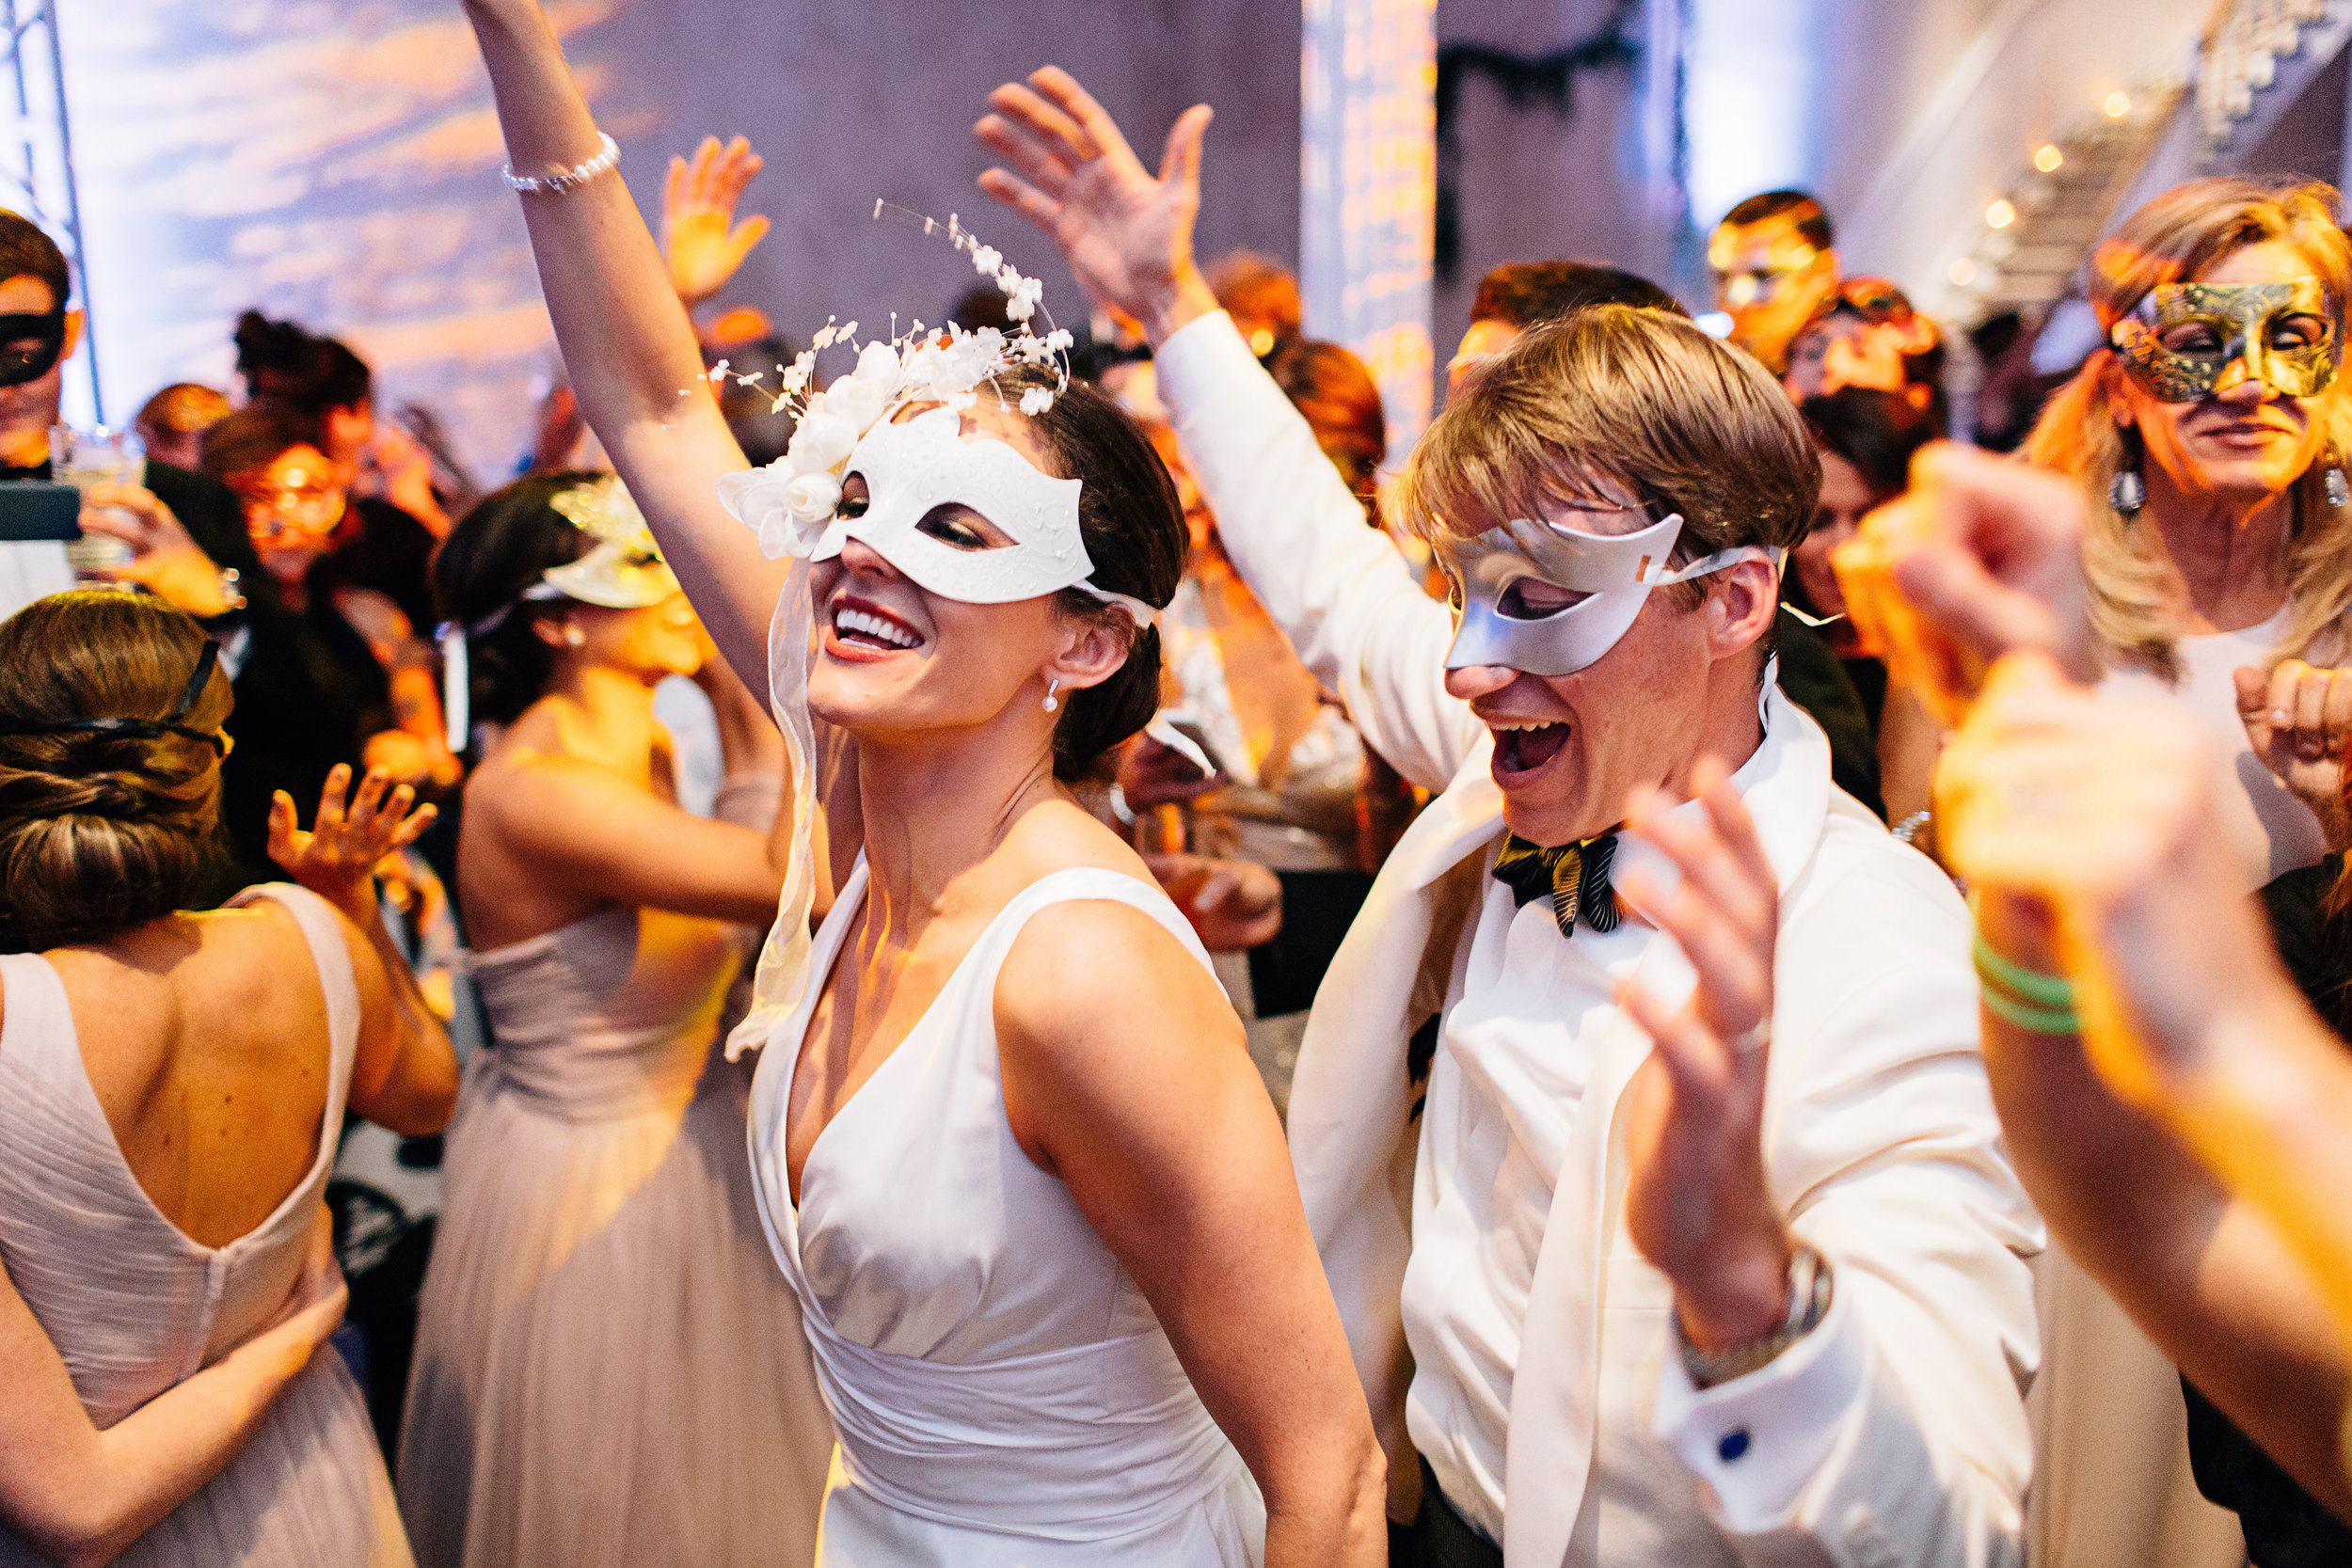 Bride and groom dancing wedding reception with masquerade masks on